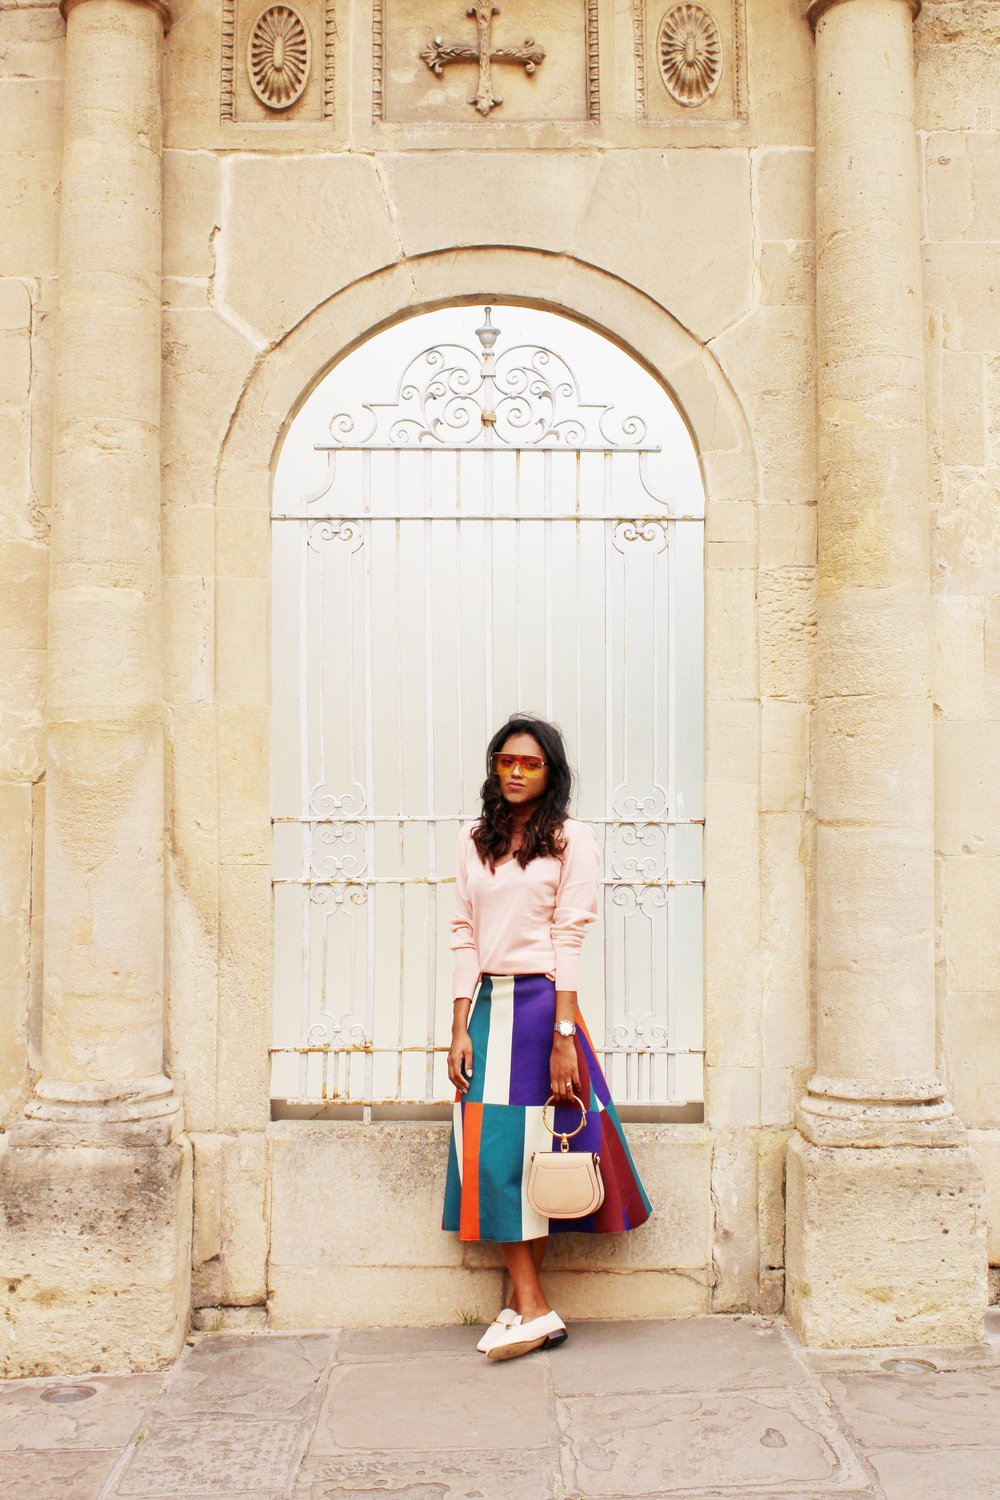 Sachini wearing sunglasses, a pink top and a colour blocked skirt